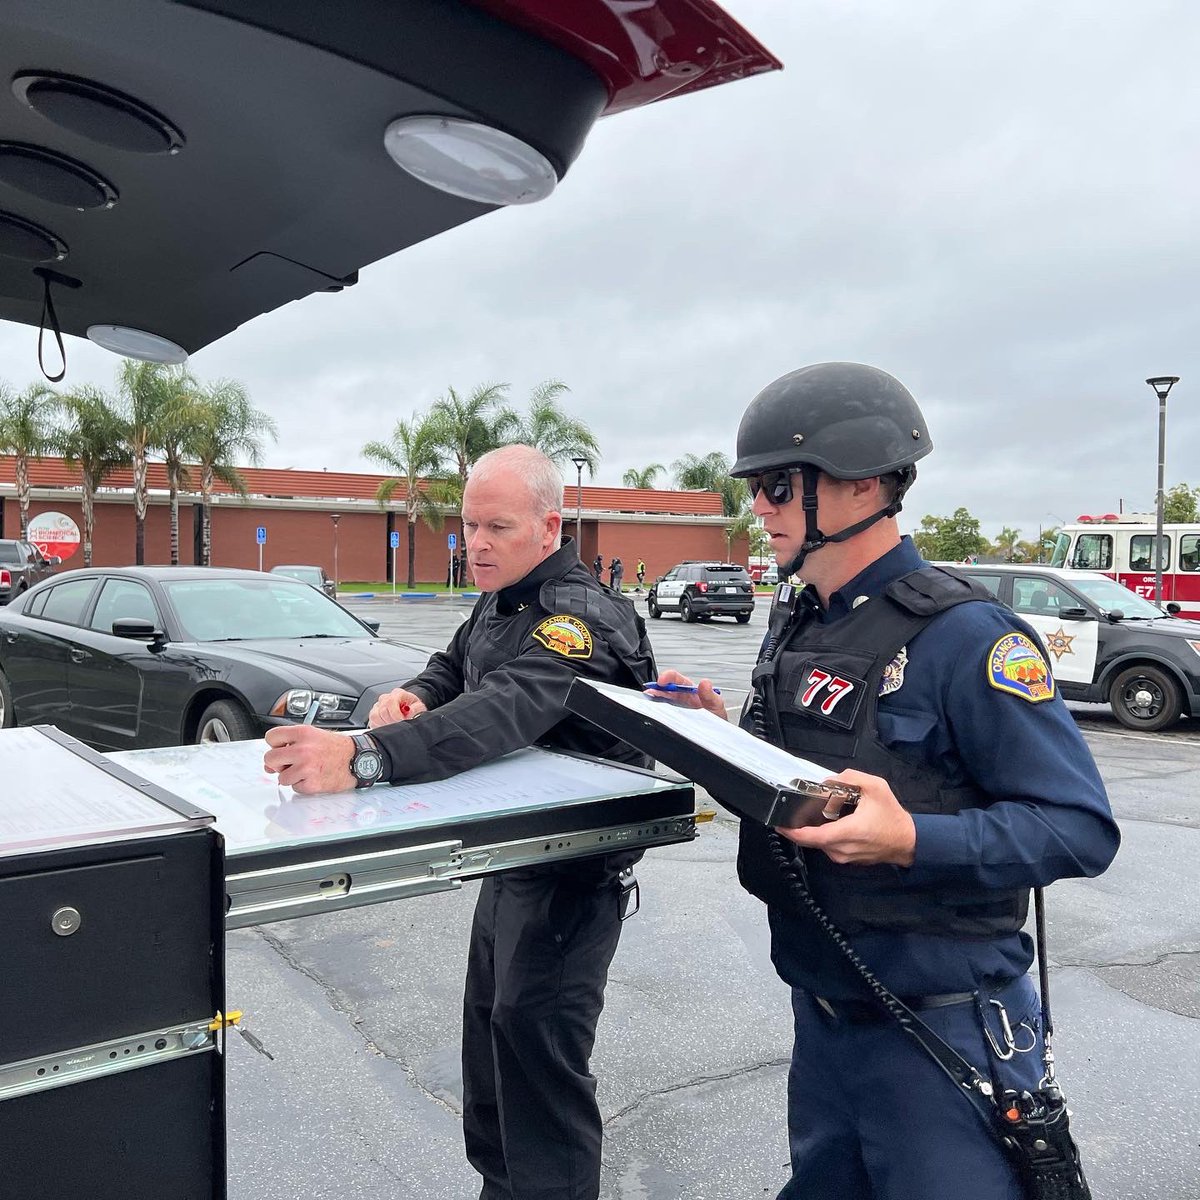 Santa Ana - Firefighters from the OCFA and outside agencies participated in a training exercise with the Santa Ana Police Department and the Santa Ana School Police that involved a shooting incident with multiple victims this morning at Saddleback High School.